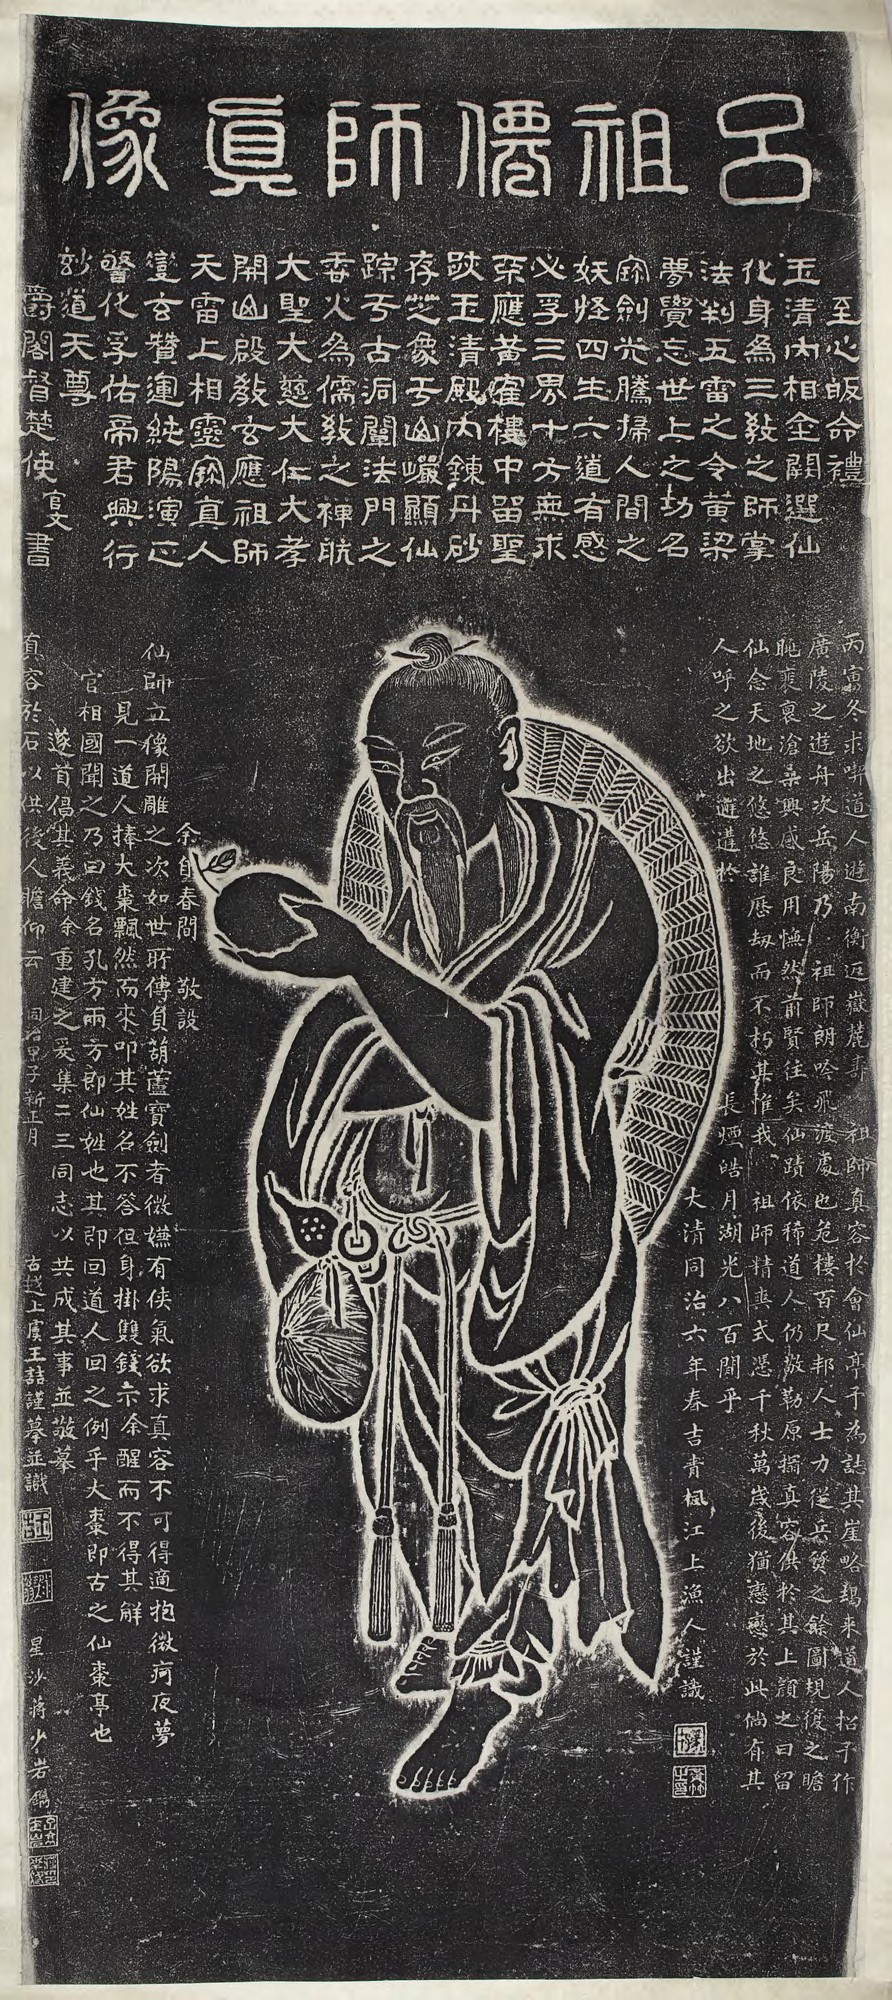 Portrait of the Lü Dongbin Carrying a Date of Immortality (y1958-266)